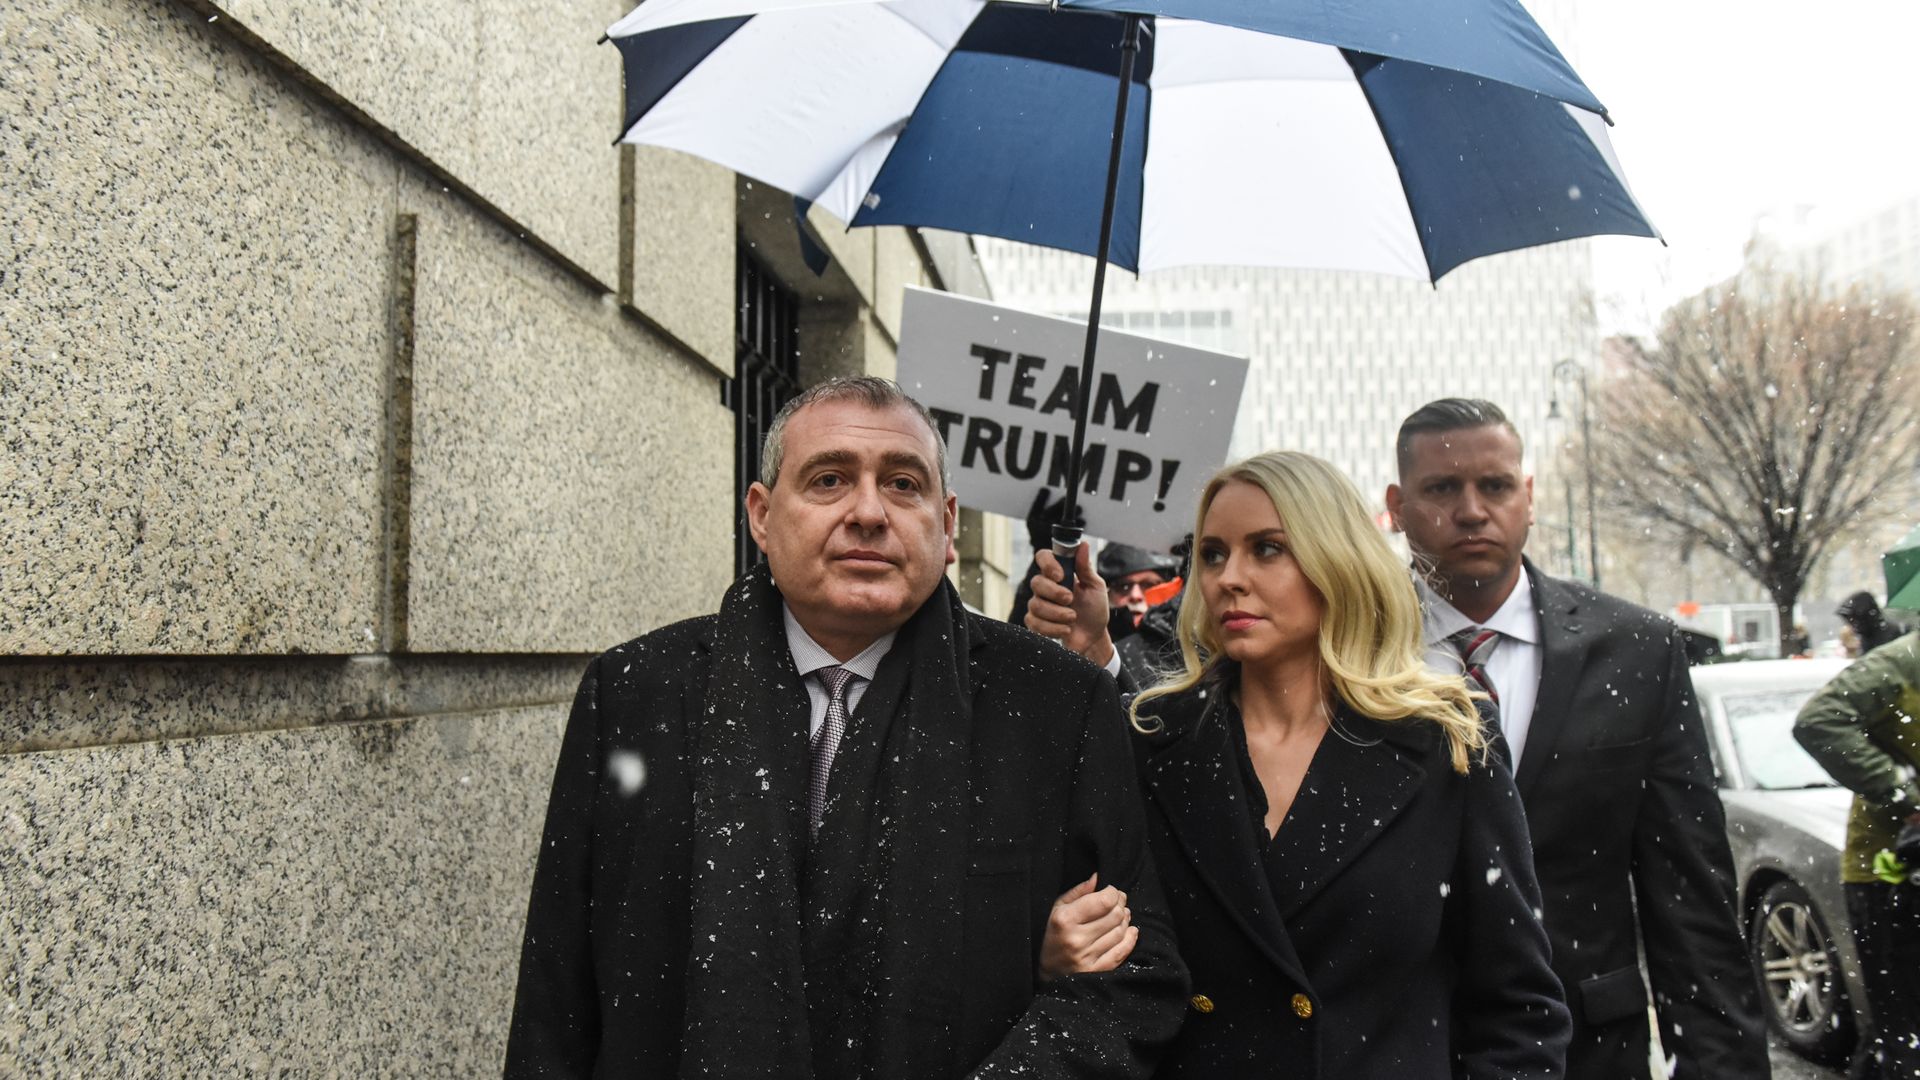 Lev Parnas arrives with his wife Svetlana Parnas at federal court on December 2, 2019 in New York City.